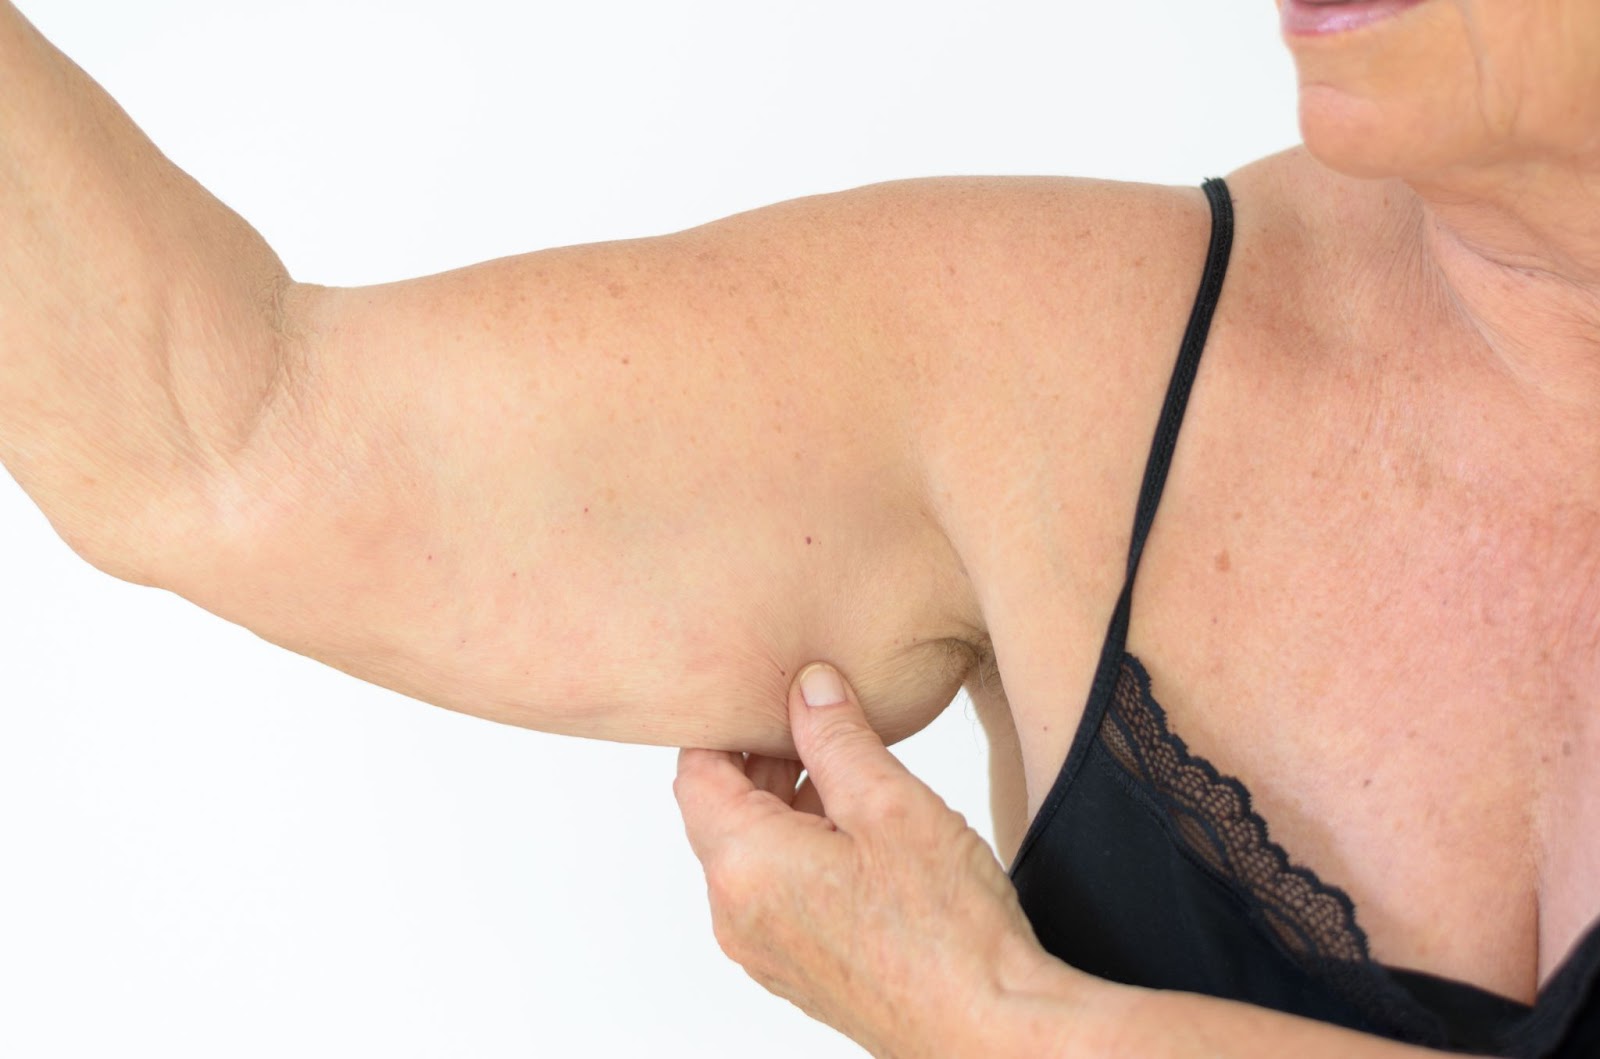 Tighten sagging breasts permanently in 7 days — Say no to saggy